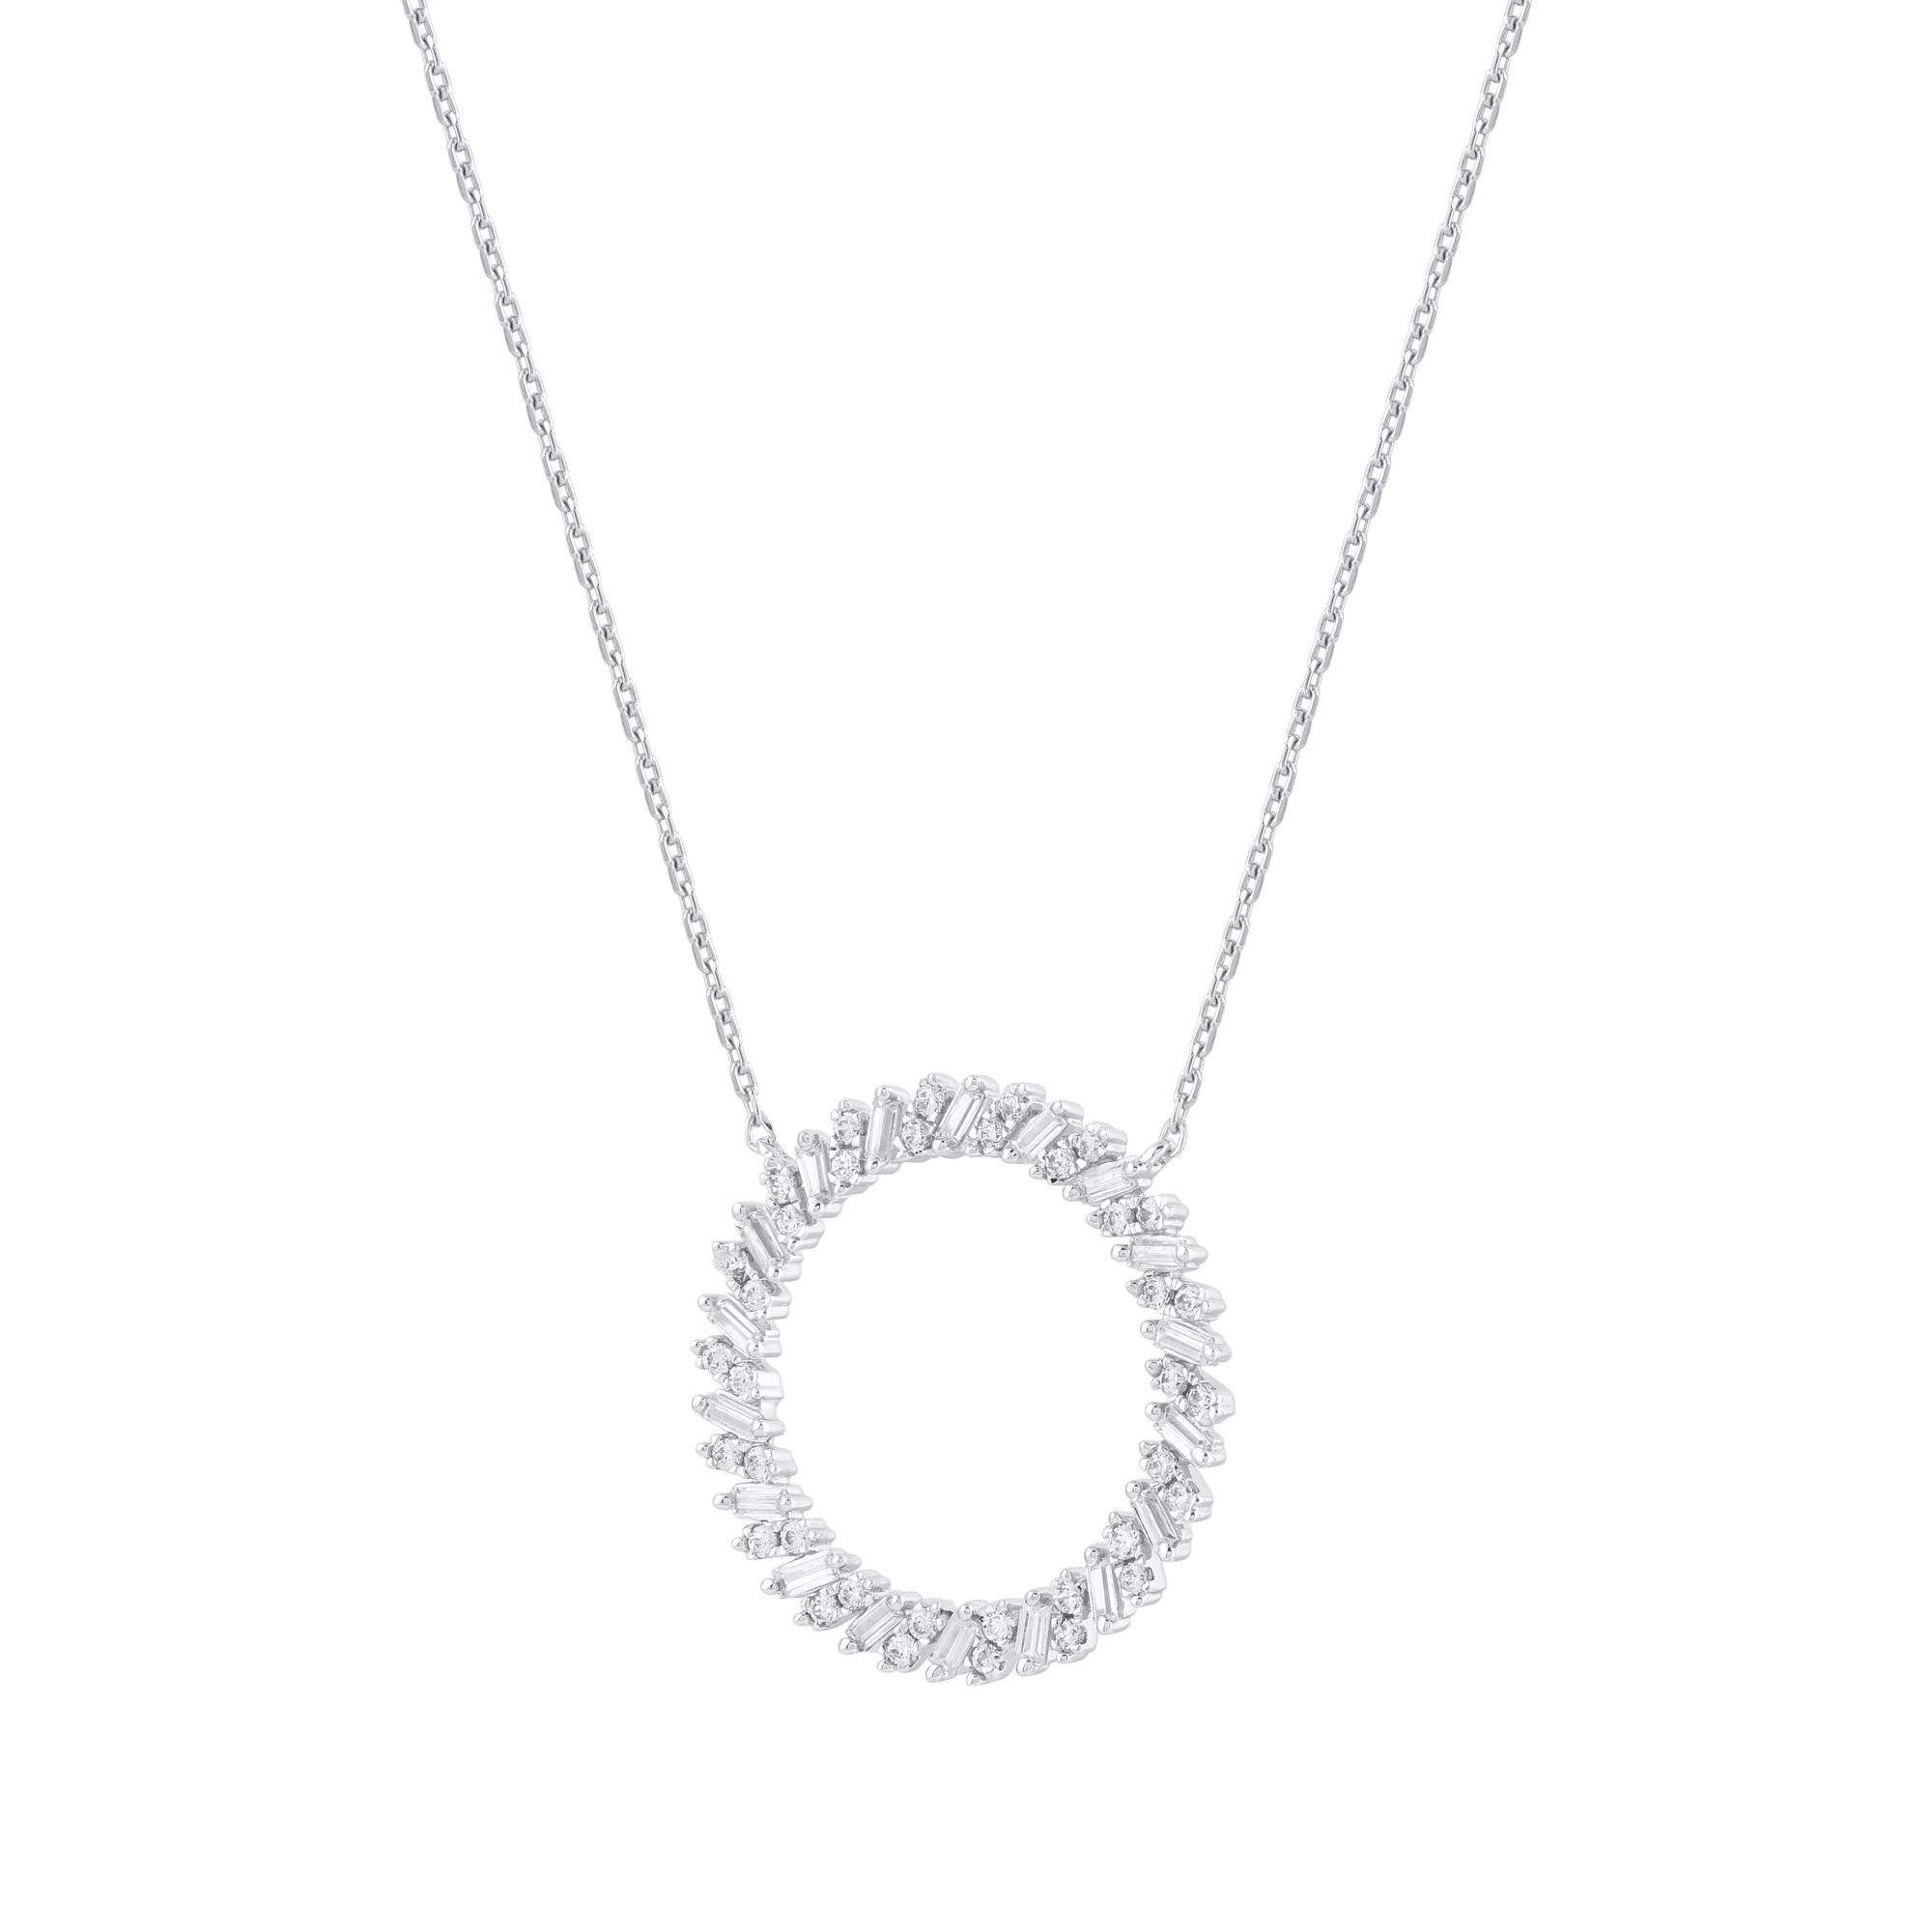 This diamond open circle eternity pendant fits any occasion with ease. These eternity pendants are studded with 54 single cut and baguette cut natural diamonds in prong setting in 14kt white gold. Diamonds are graded as H-I color and I-2 clarity.